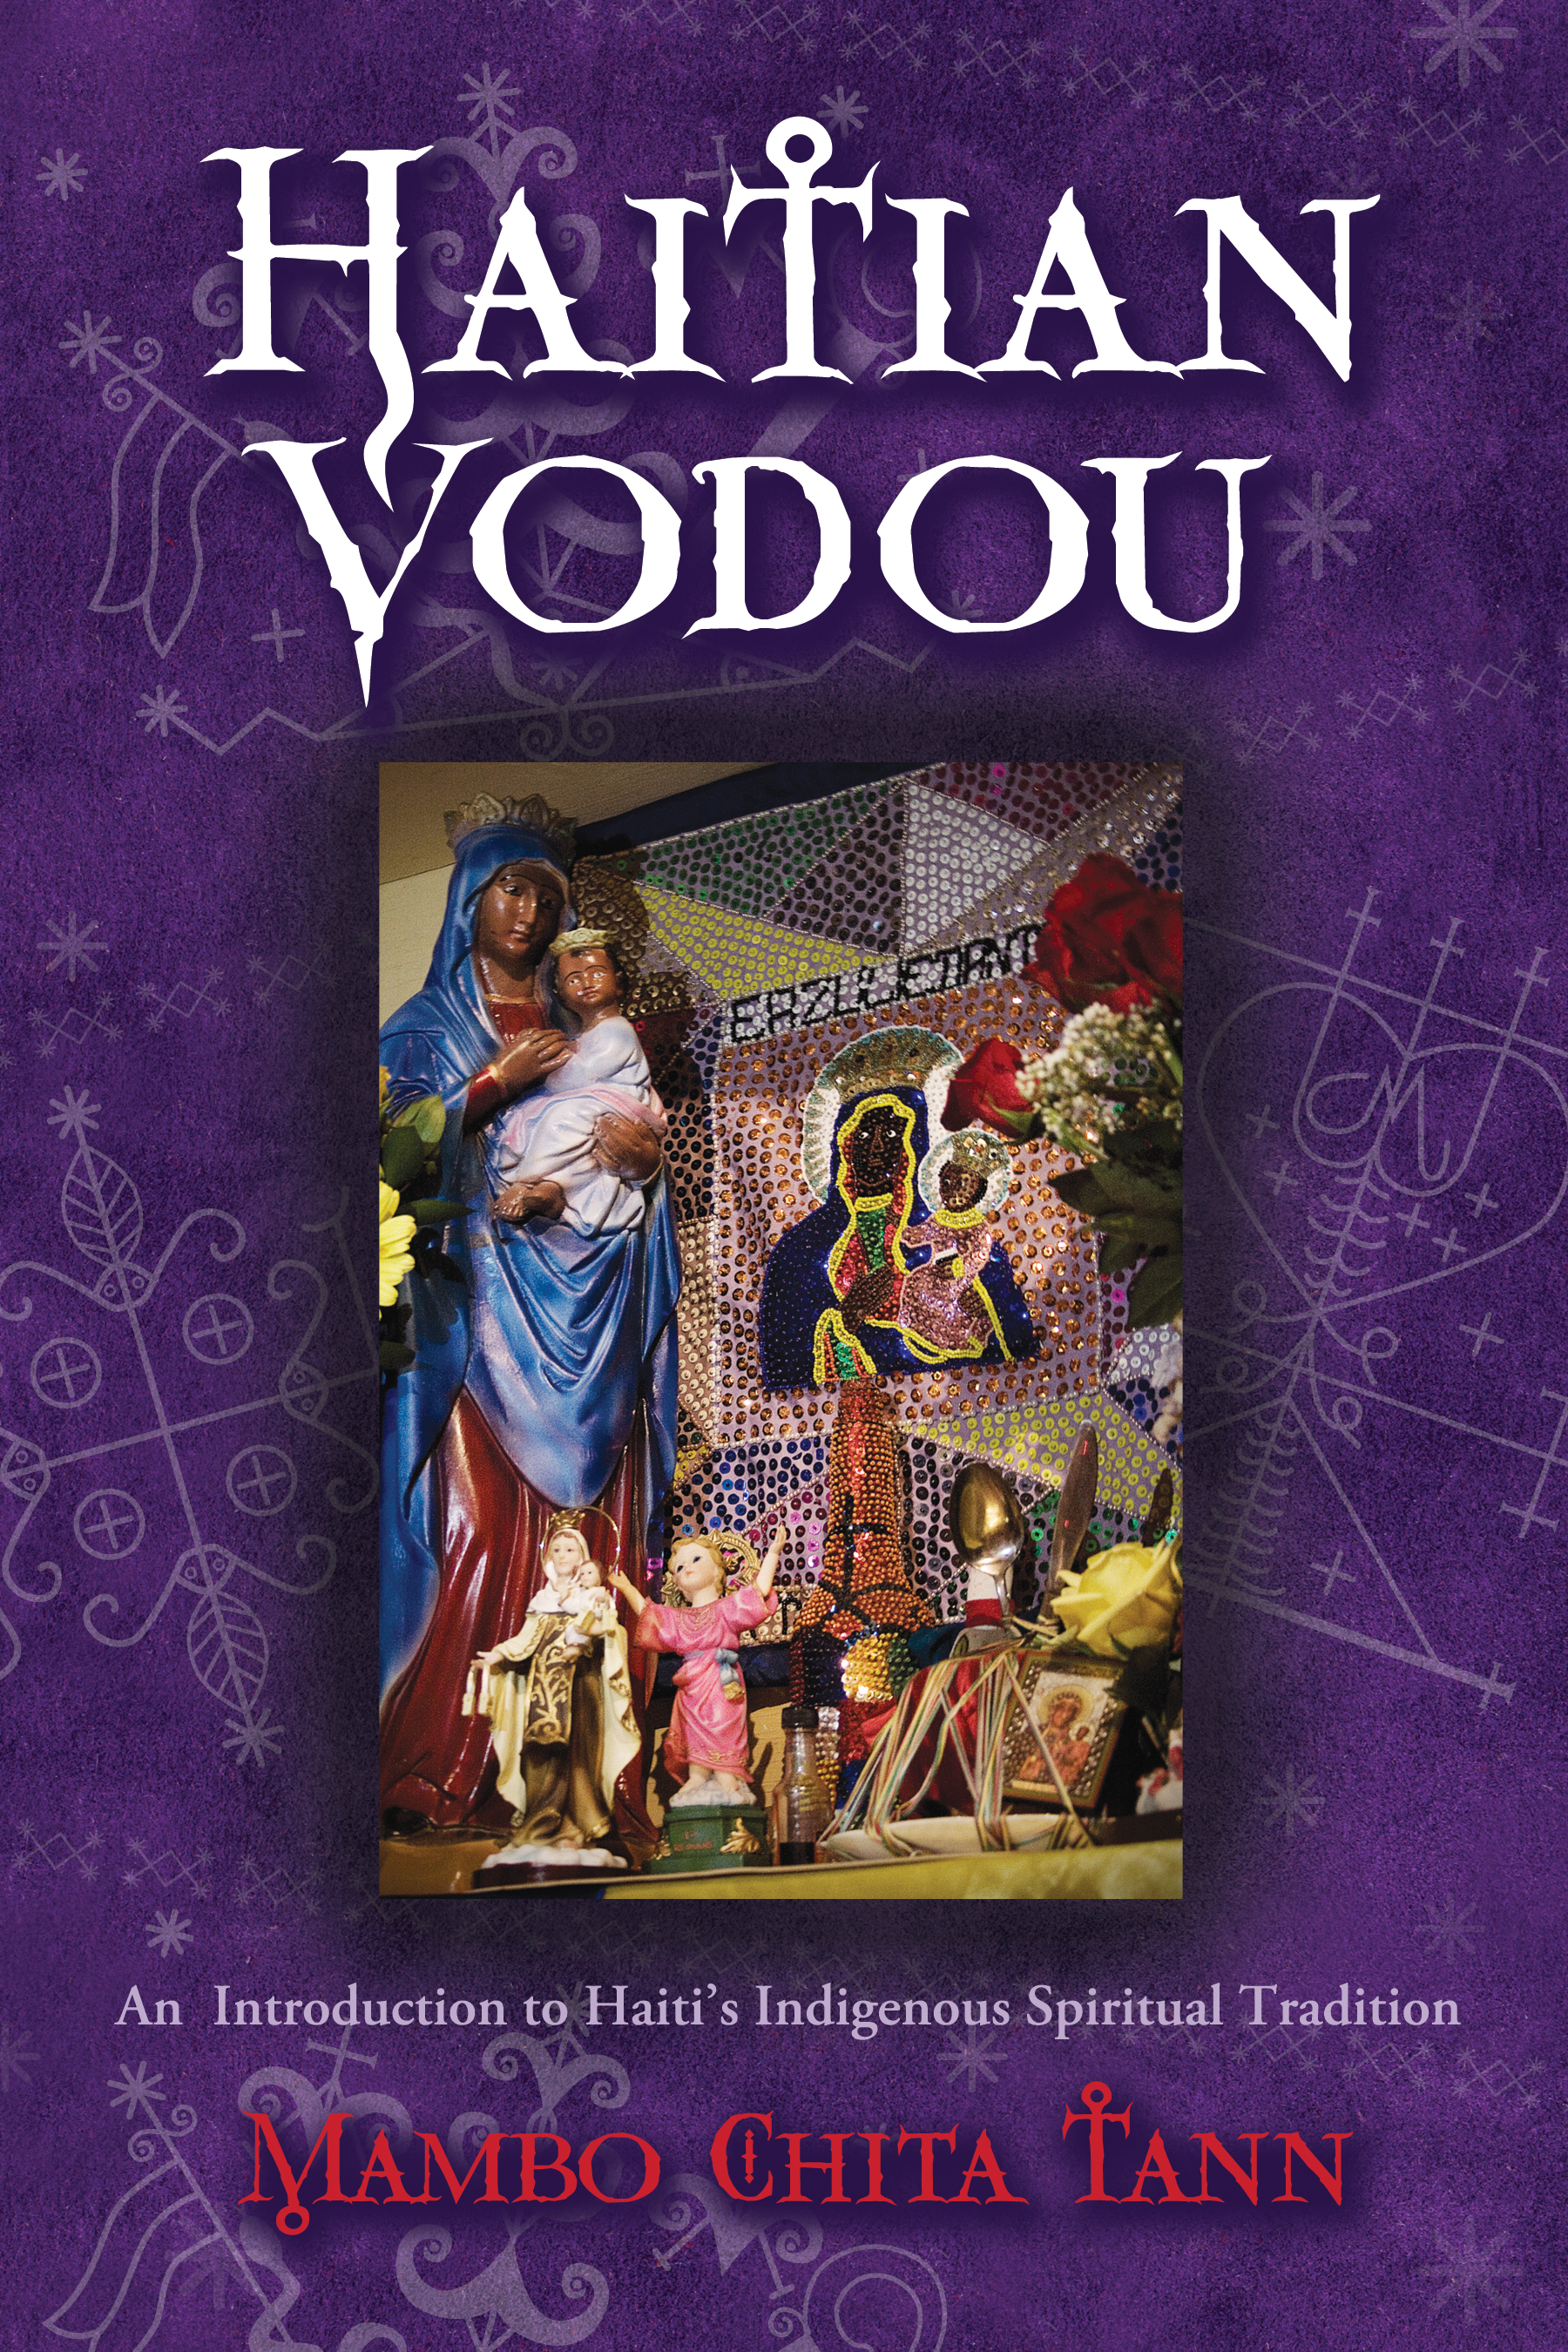 Haitian Vodou: An Introduction to Haiti's Indigenous Spiritual Tradition available February 8, 2012 everywhere!